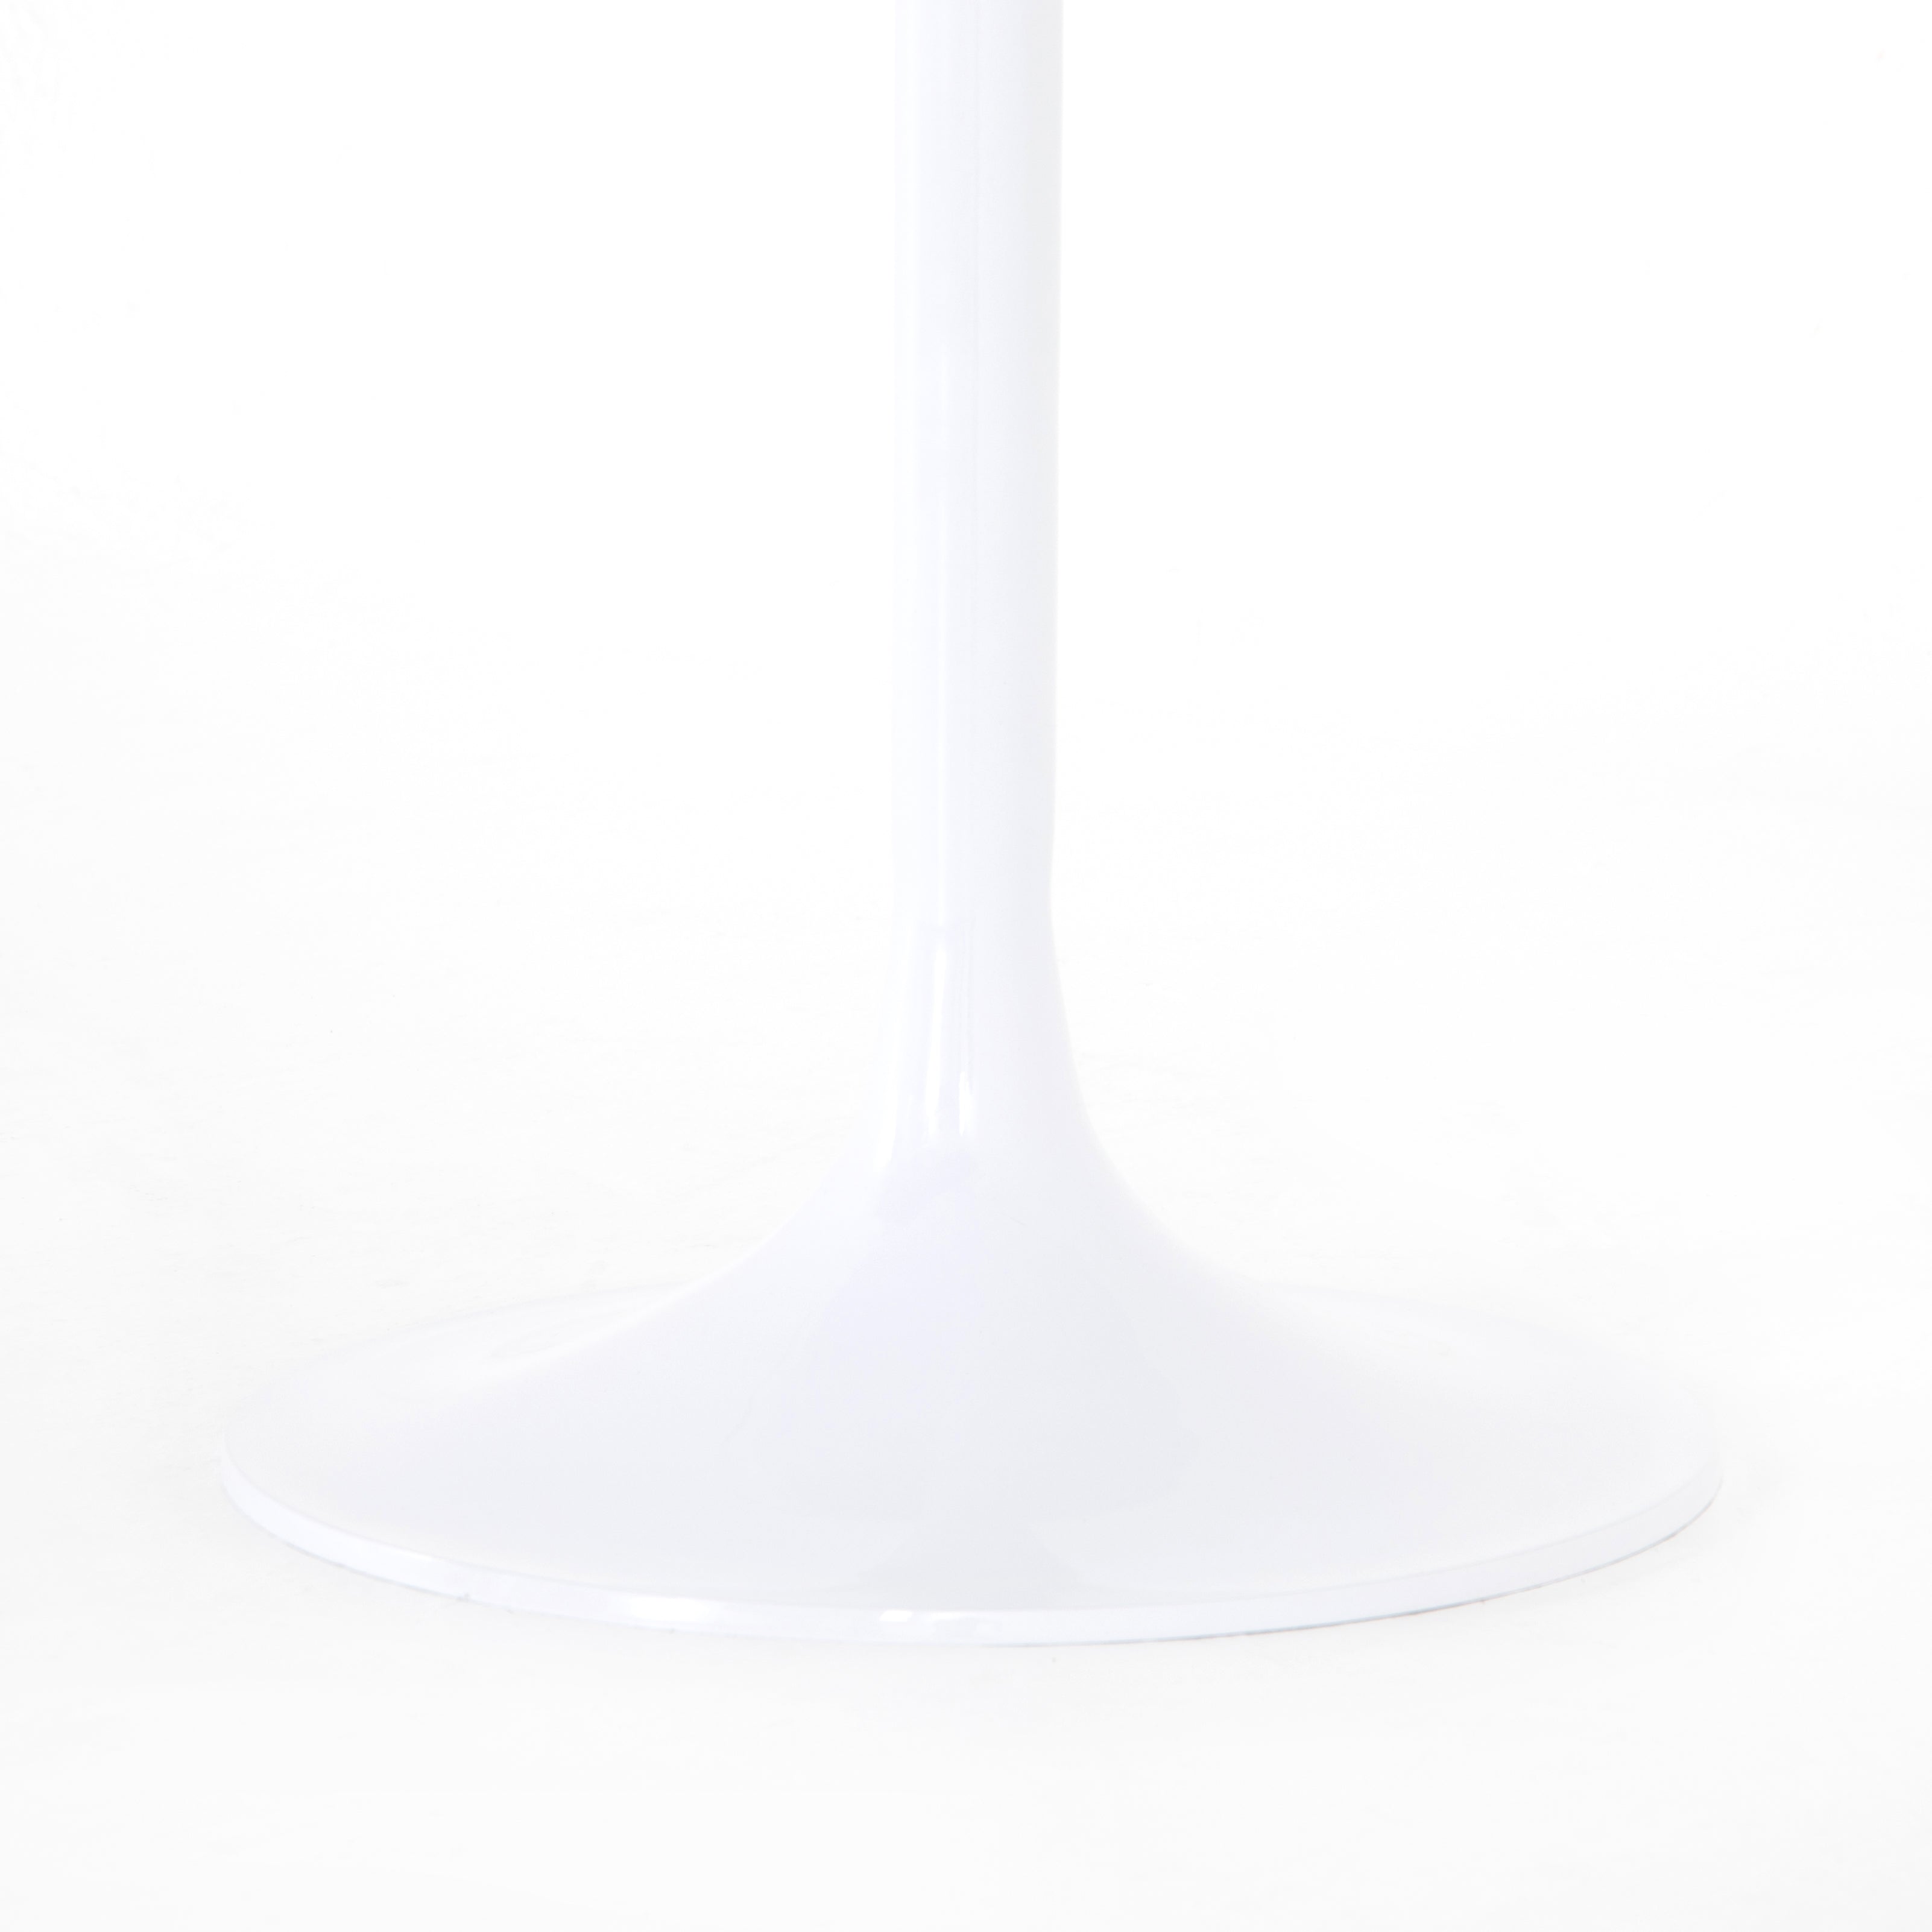 Classic tulip shaping in white cast-aluminum makes for a modern Simone White Bistro Table. Great indoors or out. Cover or store indoors during inclement weather and when not in use.  Overall Dimensions: 42"w x 42"d x 30"h Materials: Aluminum